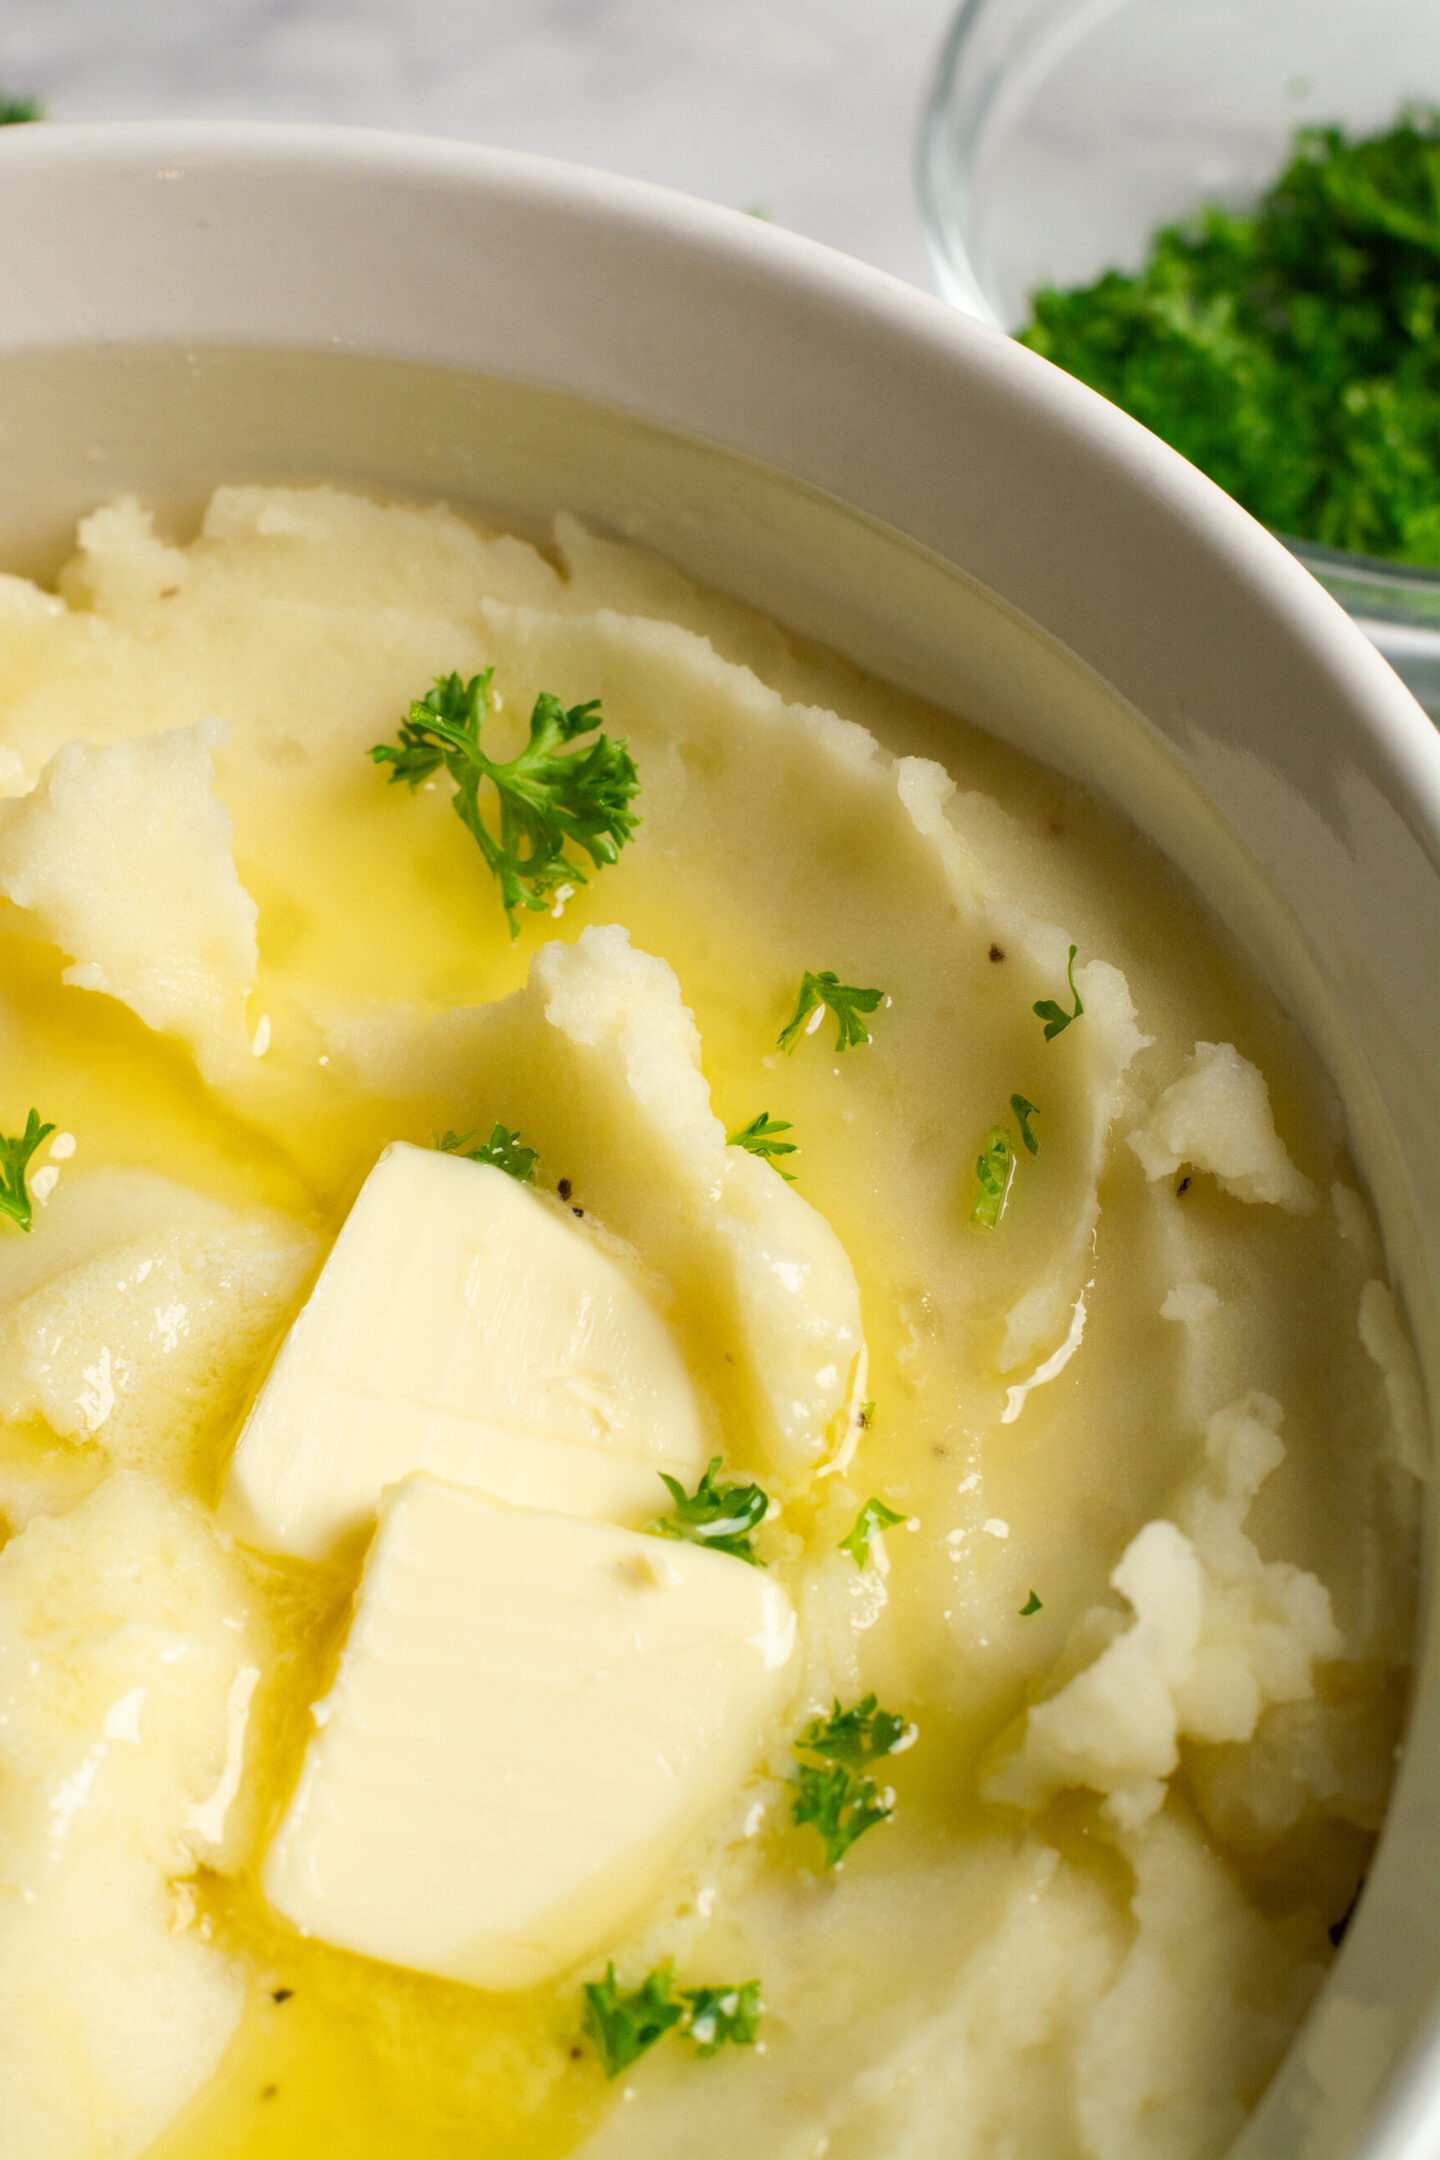 A close up of a bowl of mashed potatoes with two tablespoons of butter, drizzled with more melted butter and sprinkled with parsley.